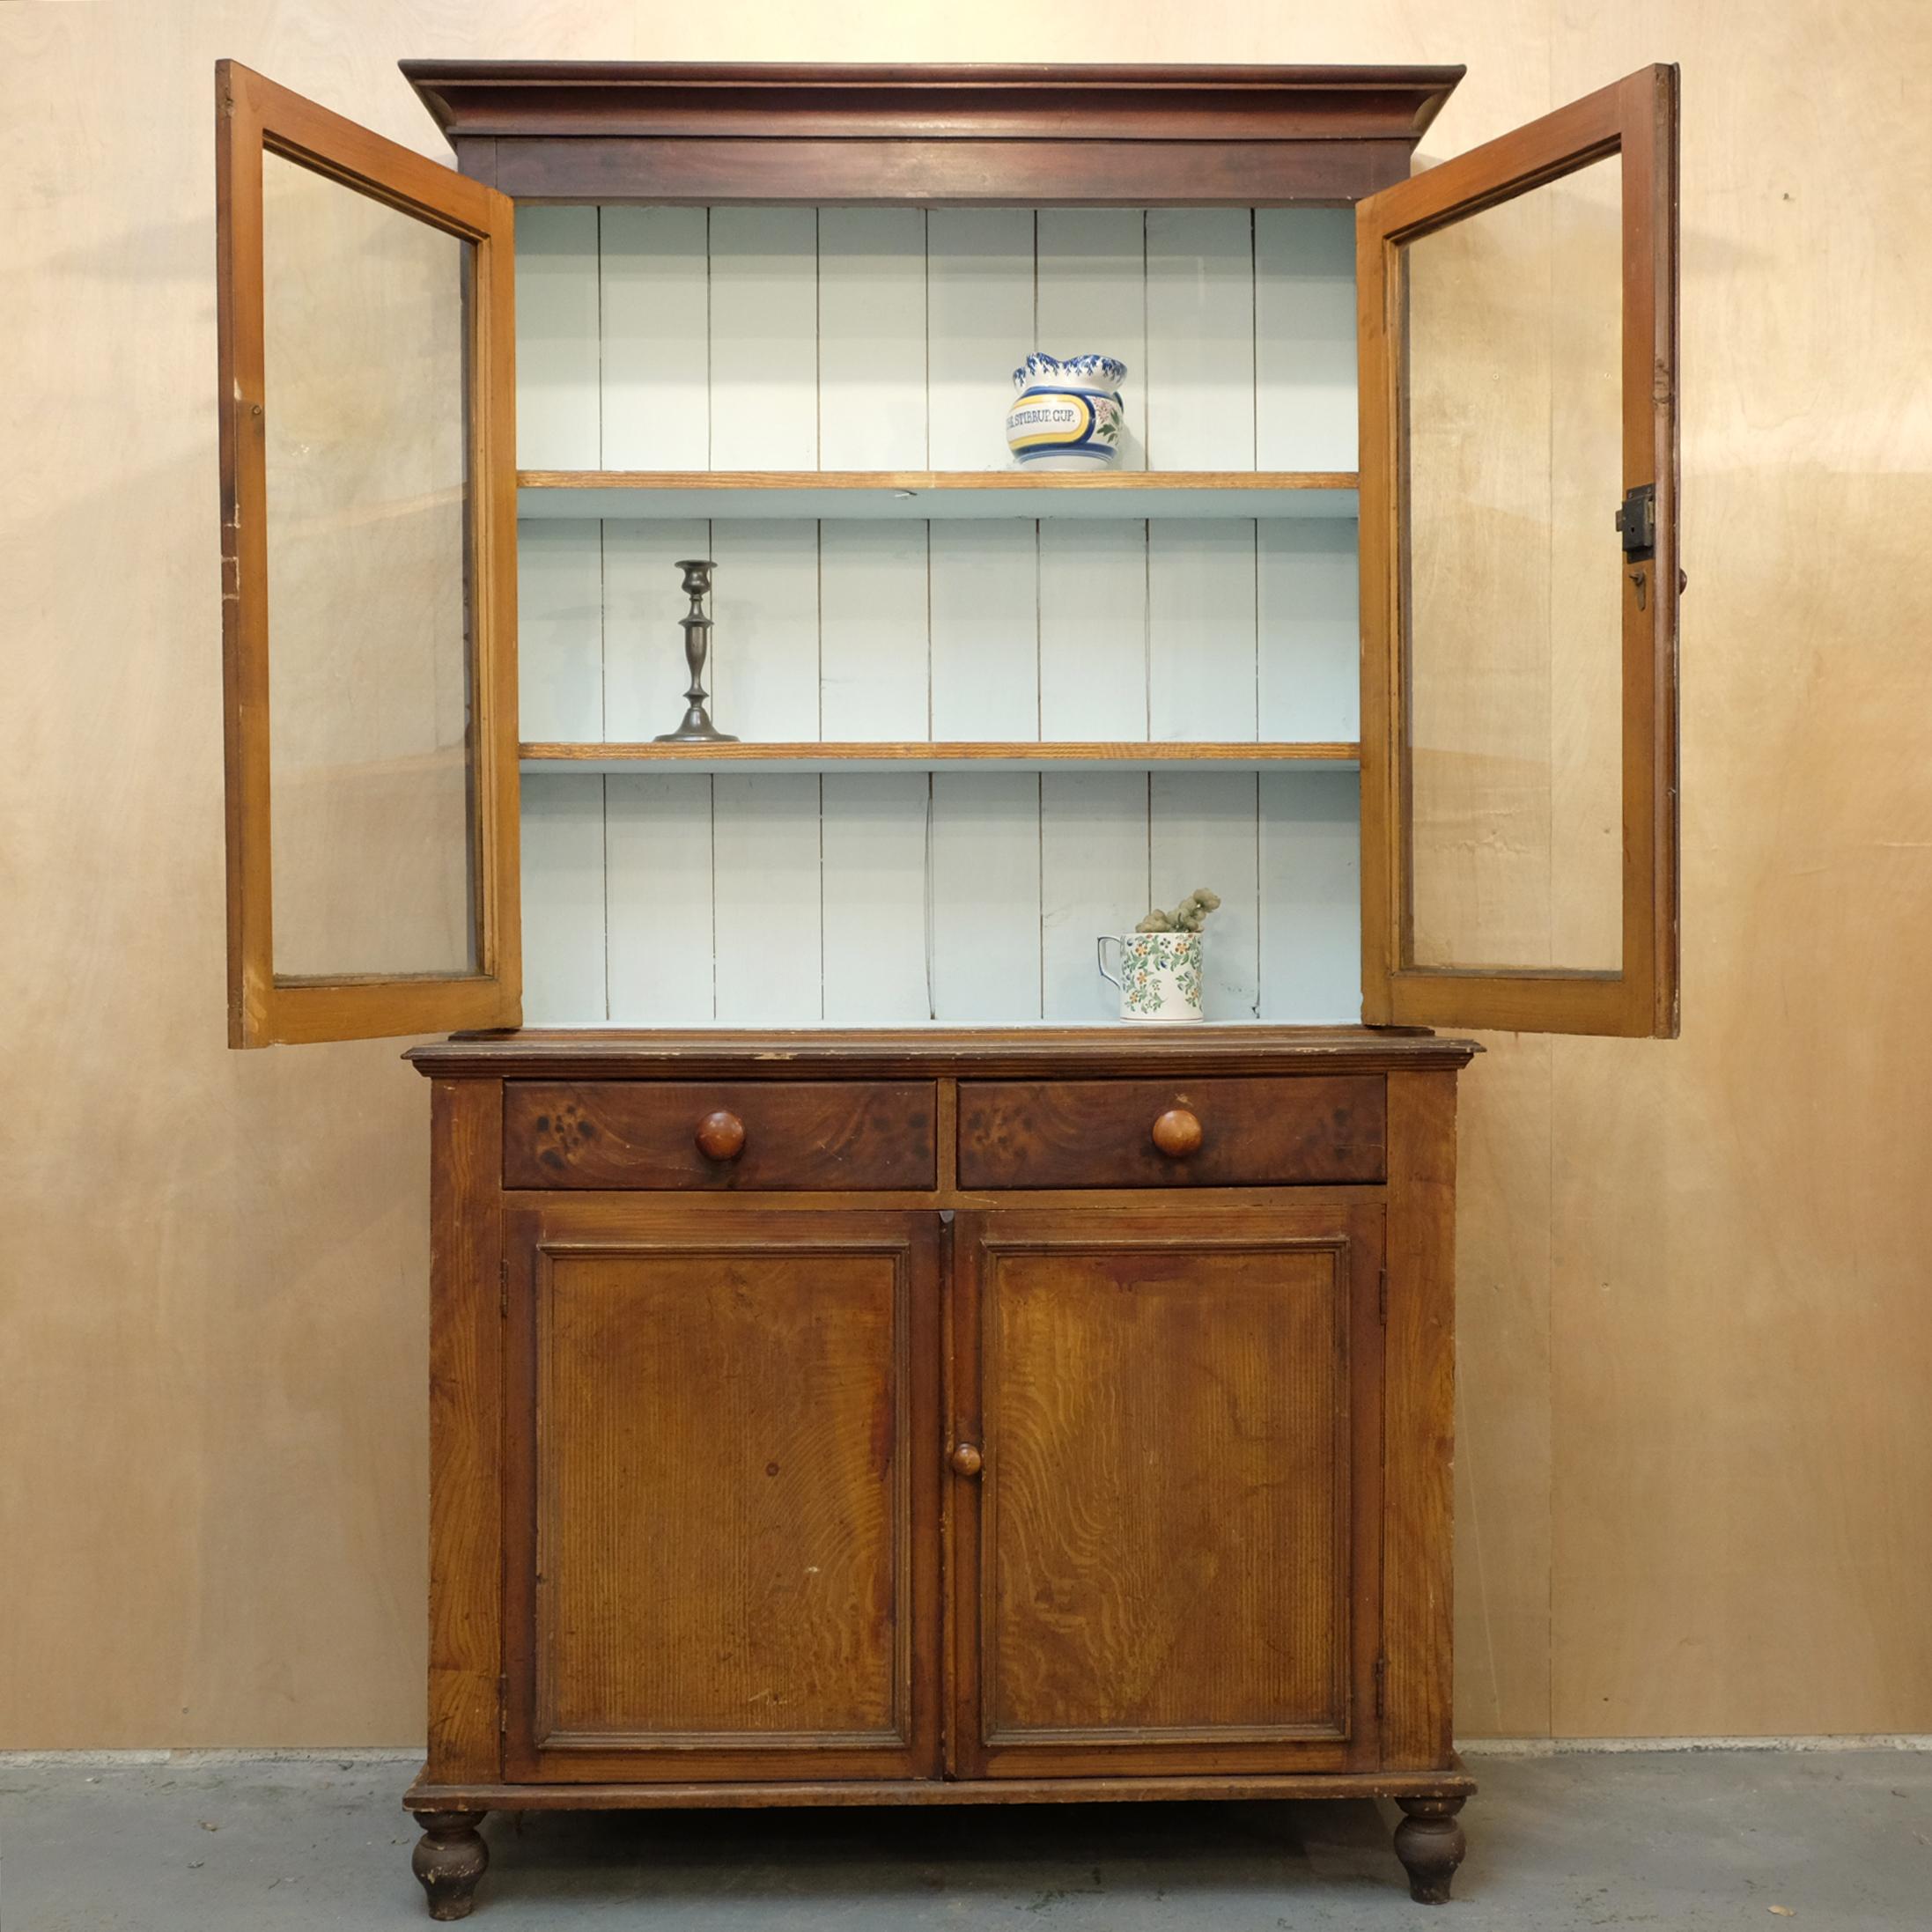 Victorian glazed pine bookcase or dresser in original combwork finish. Two-door cupboard under two drawers to the lower half. The upper half with two glazed doors and painted shelved interior. The original handmade glass with characterful air